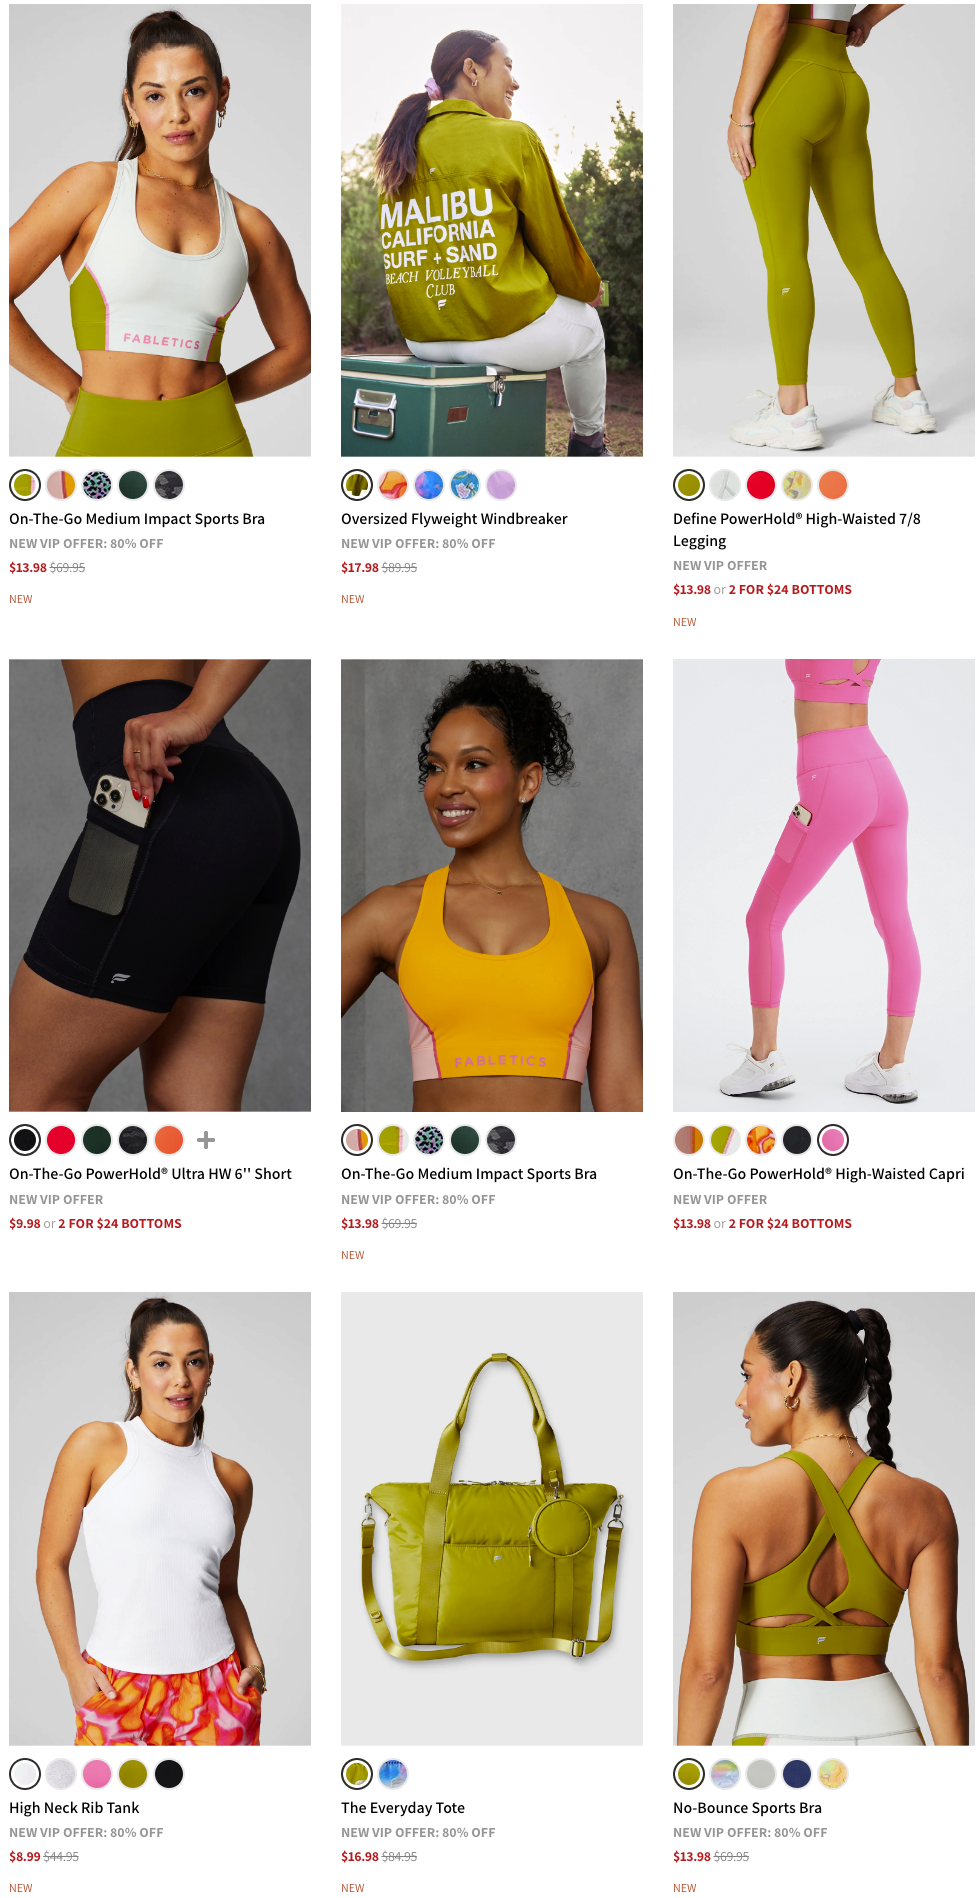 Fabletics - The June collection is also available